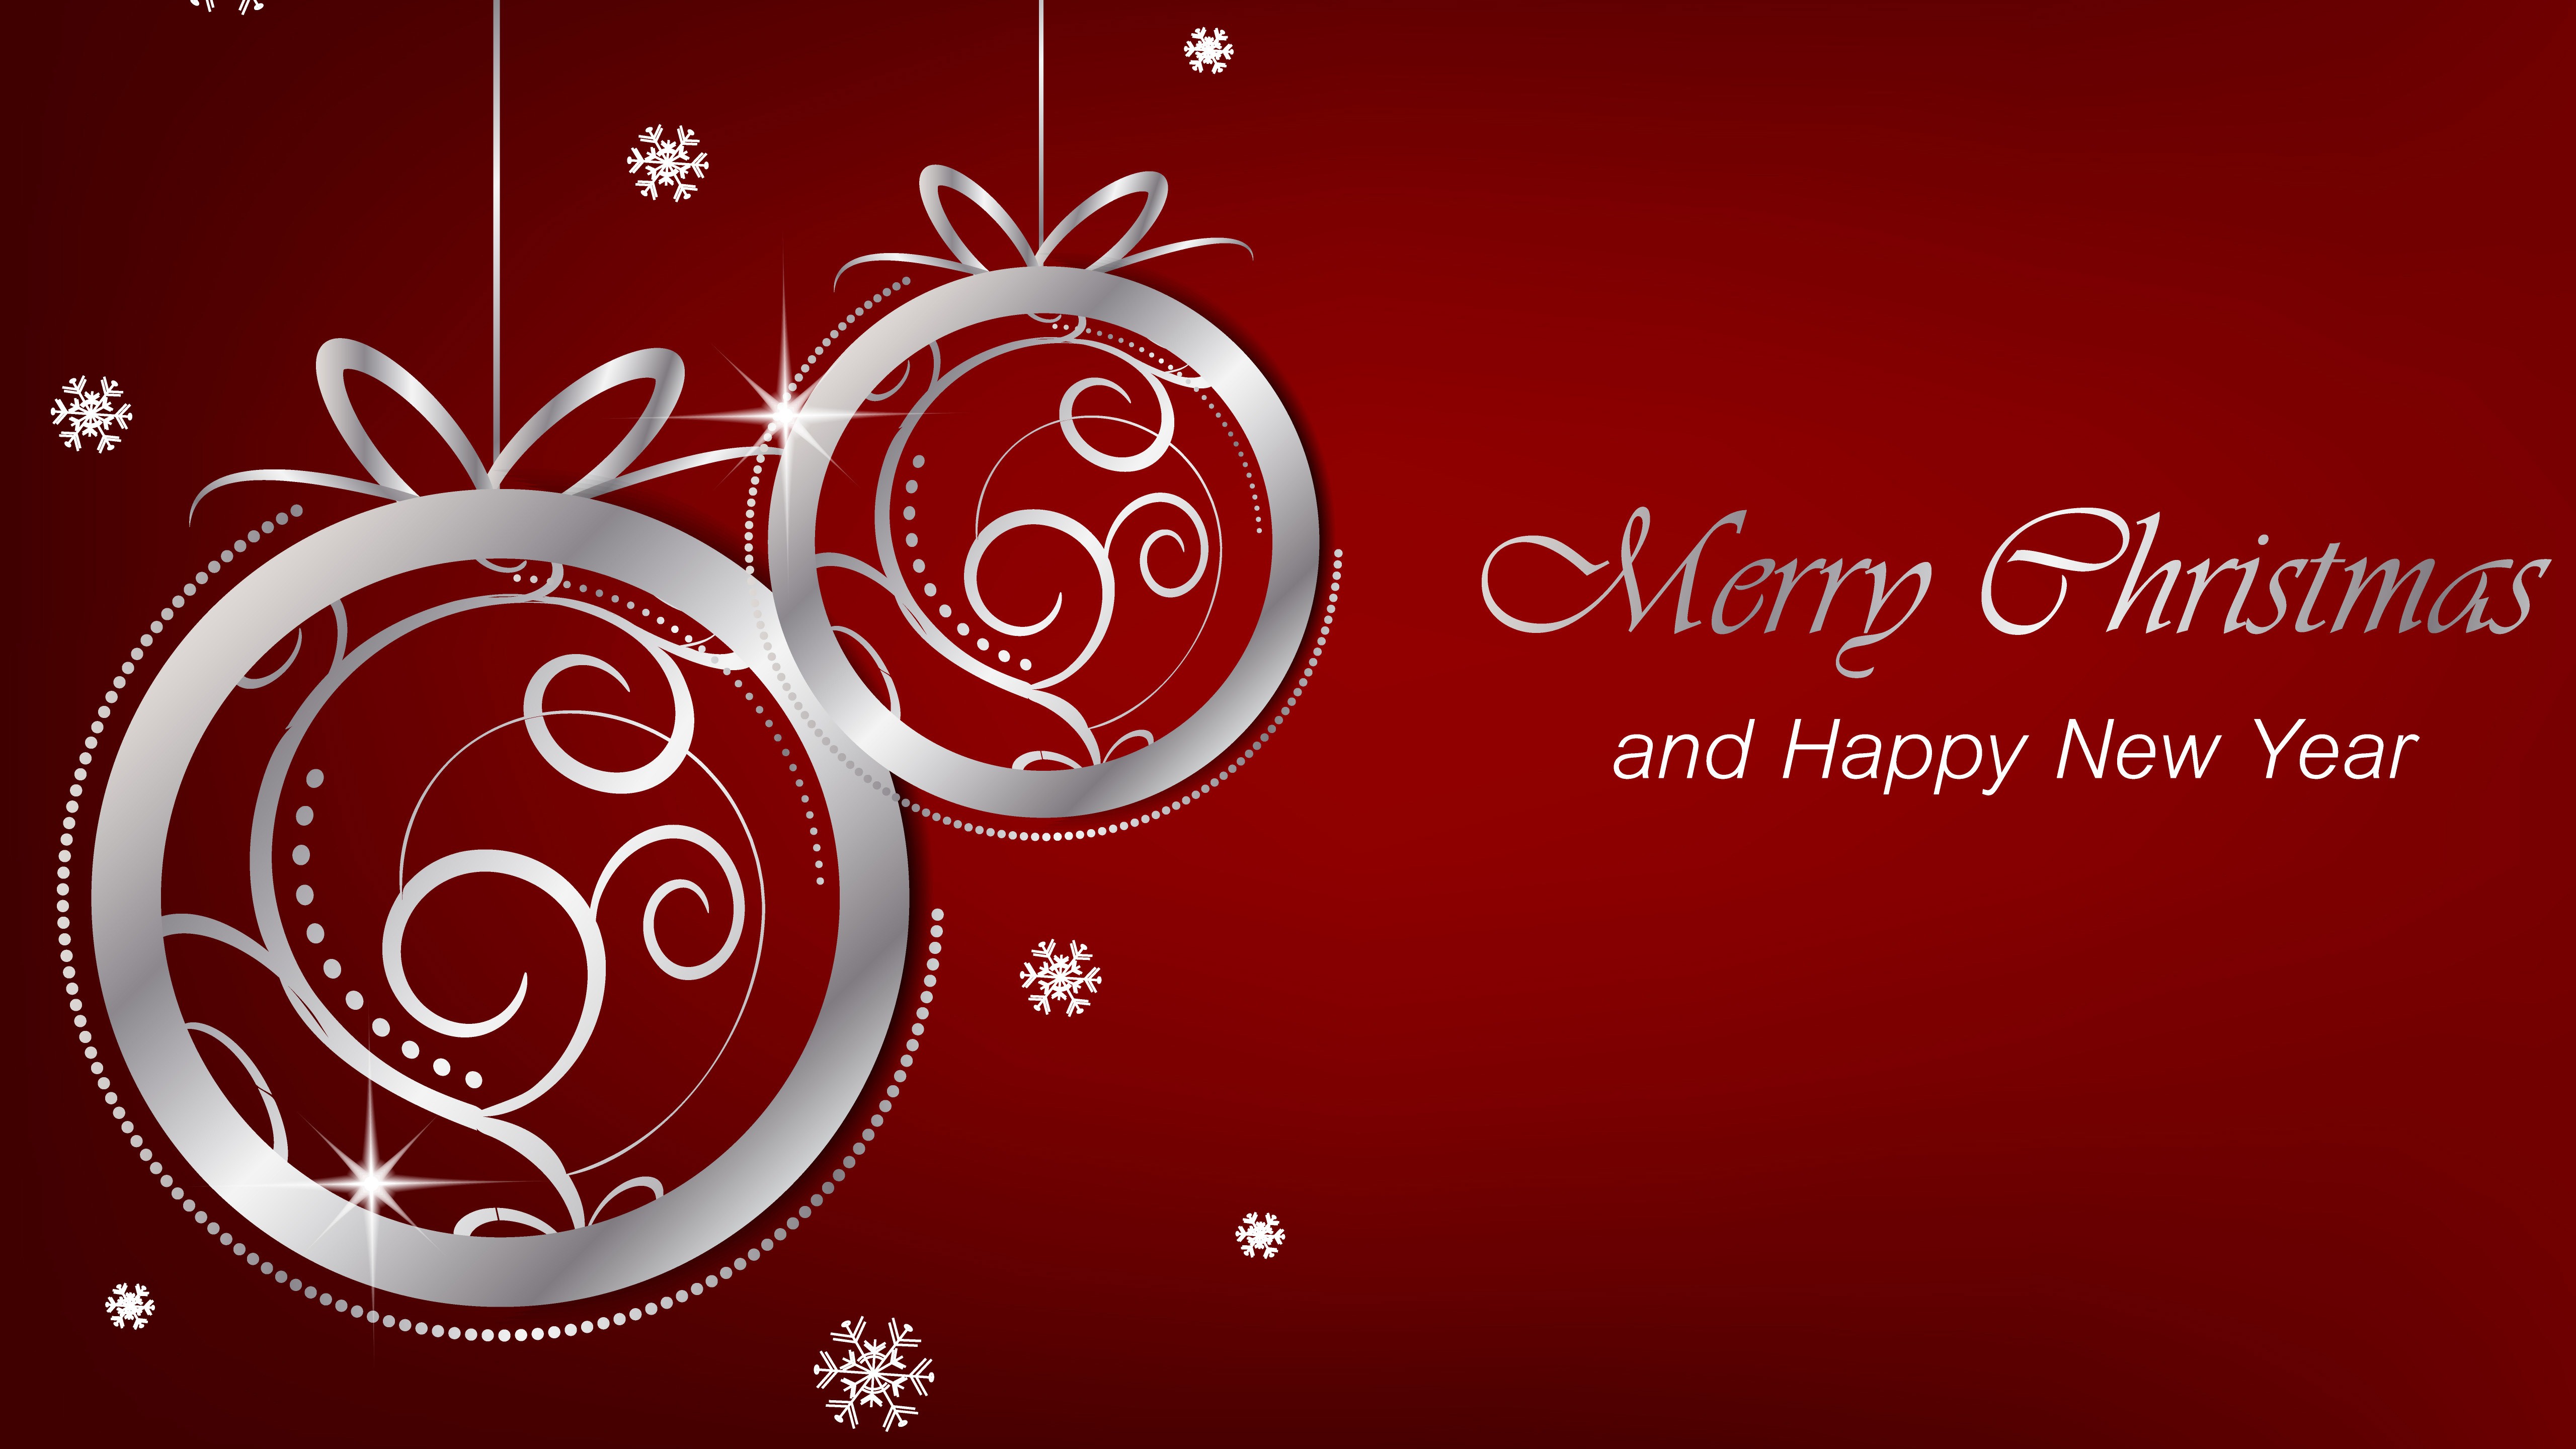 christmas wallpaper hd,red,text,ornament,greeting,illustration